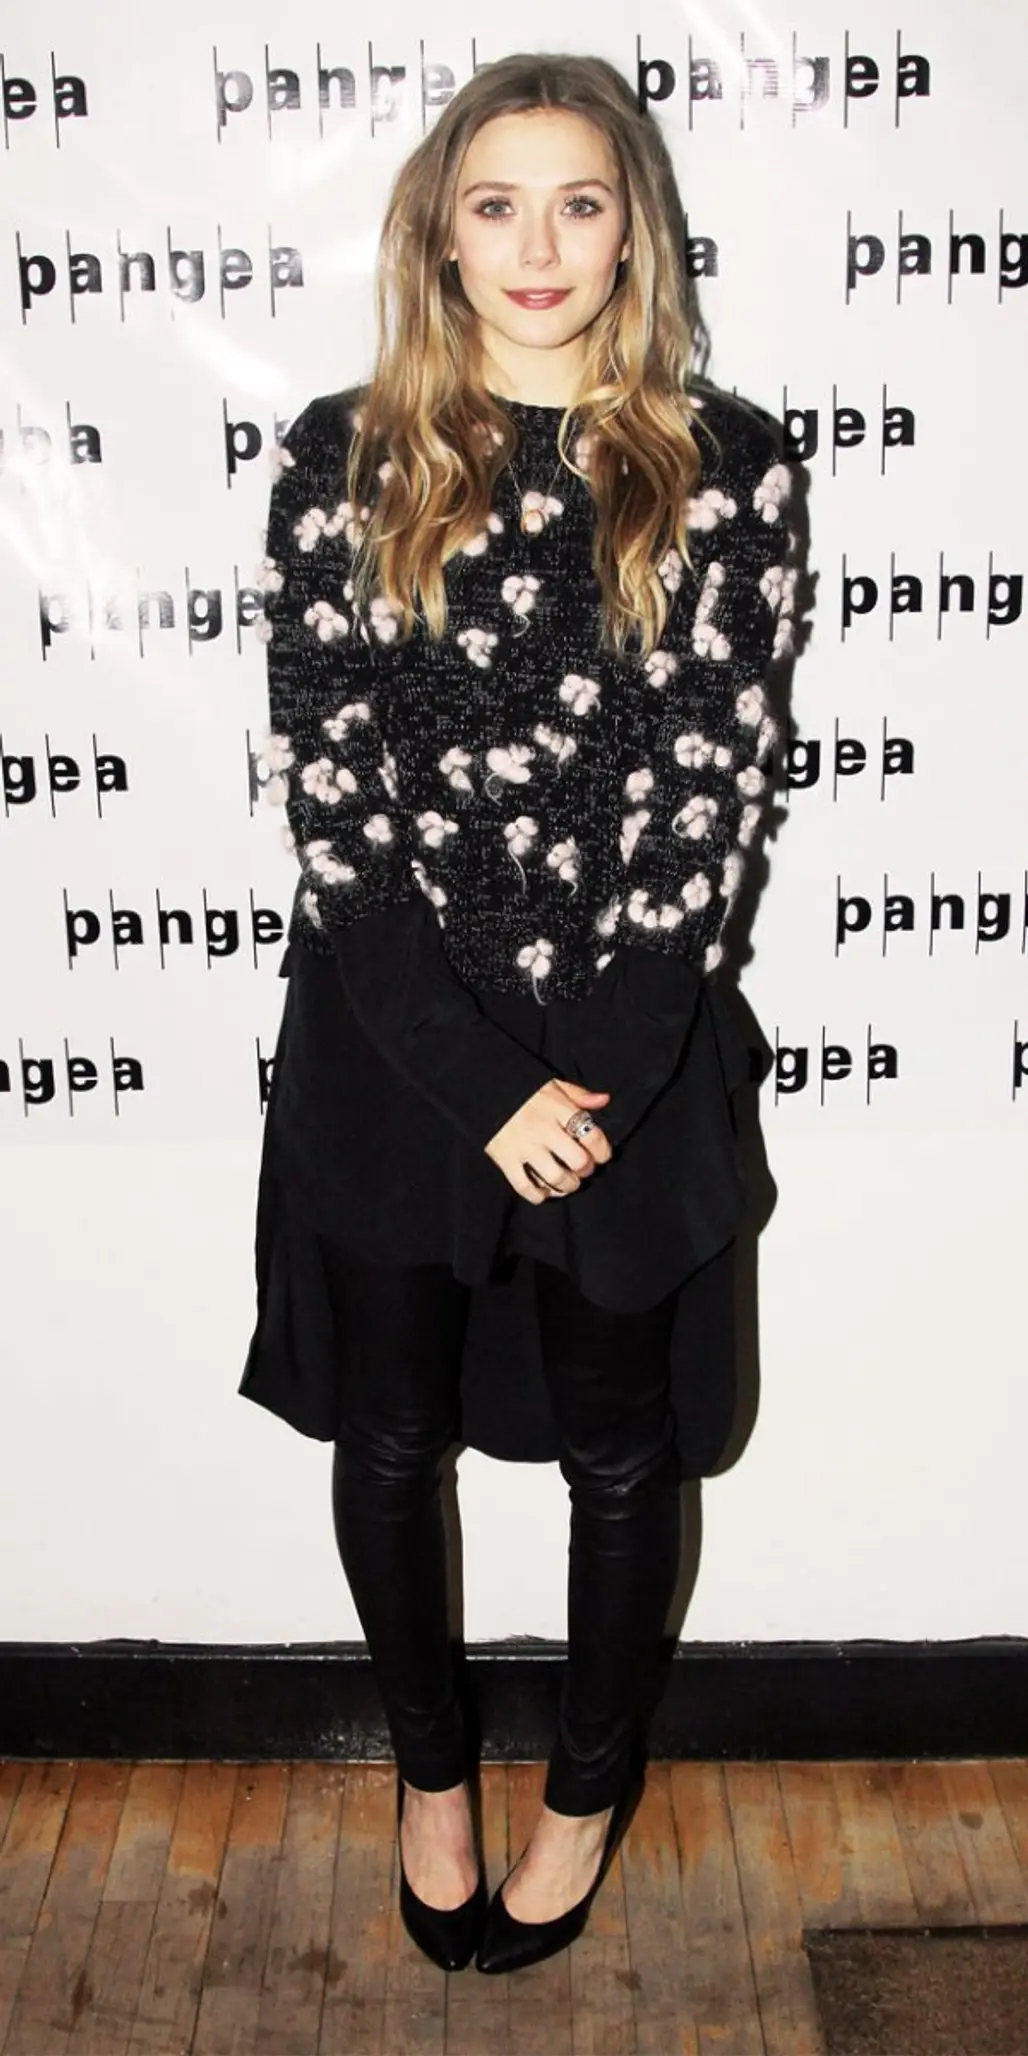 If You're Afraid That Your Leggings Outline Your Shape a Little Too Well, You Can Opt to Add Layers. Elizabeth Olsen Looks Cozy in Her Tunic and Sweater Top